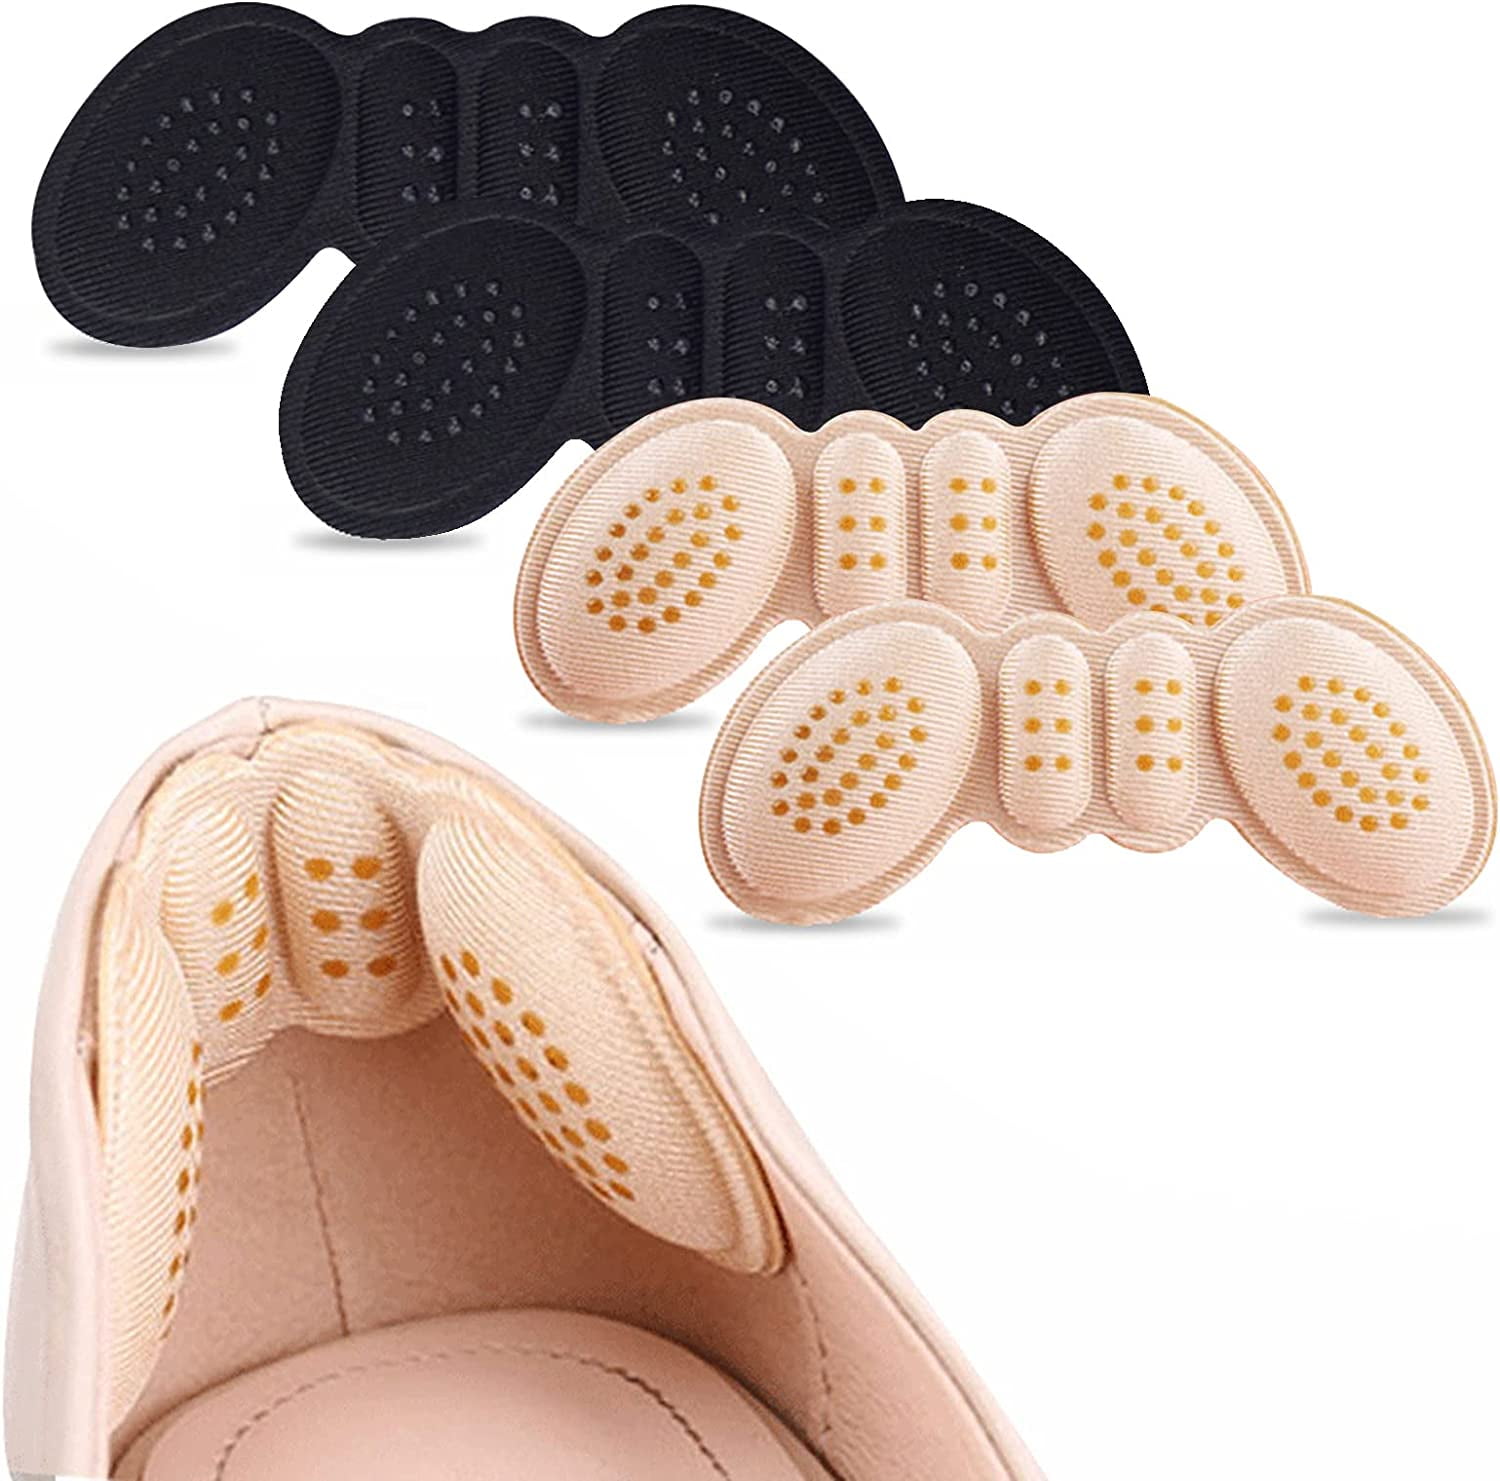 Reusable Heel Inserts for Women and Men [Extra Soft Heel Protectors] Add  Comfort and Extra Volume for Loose Shoes, Self-Adhesive and Shock Absorbing Heel  Pads - Walmart.com